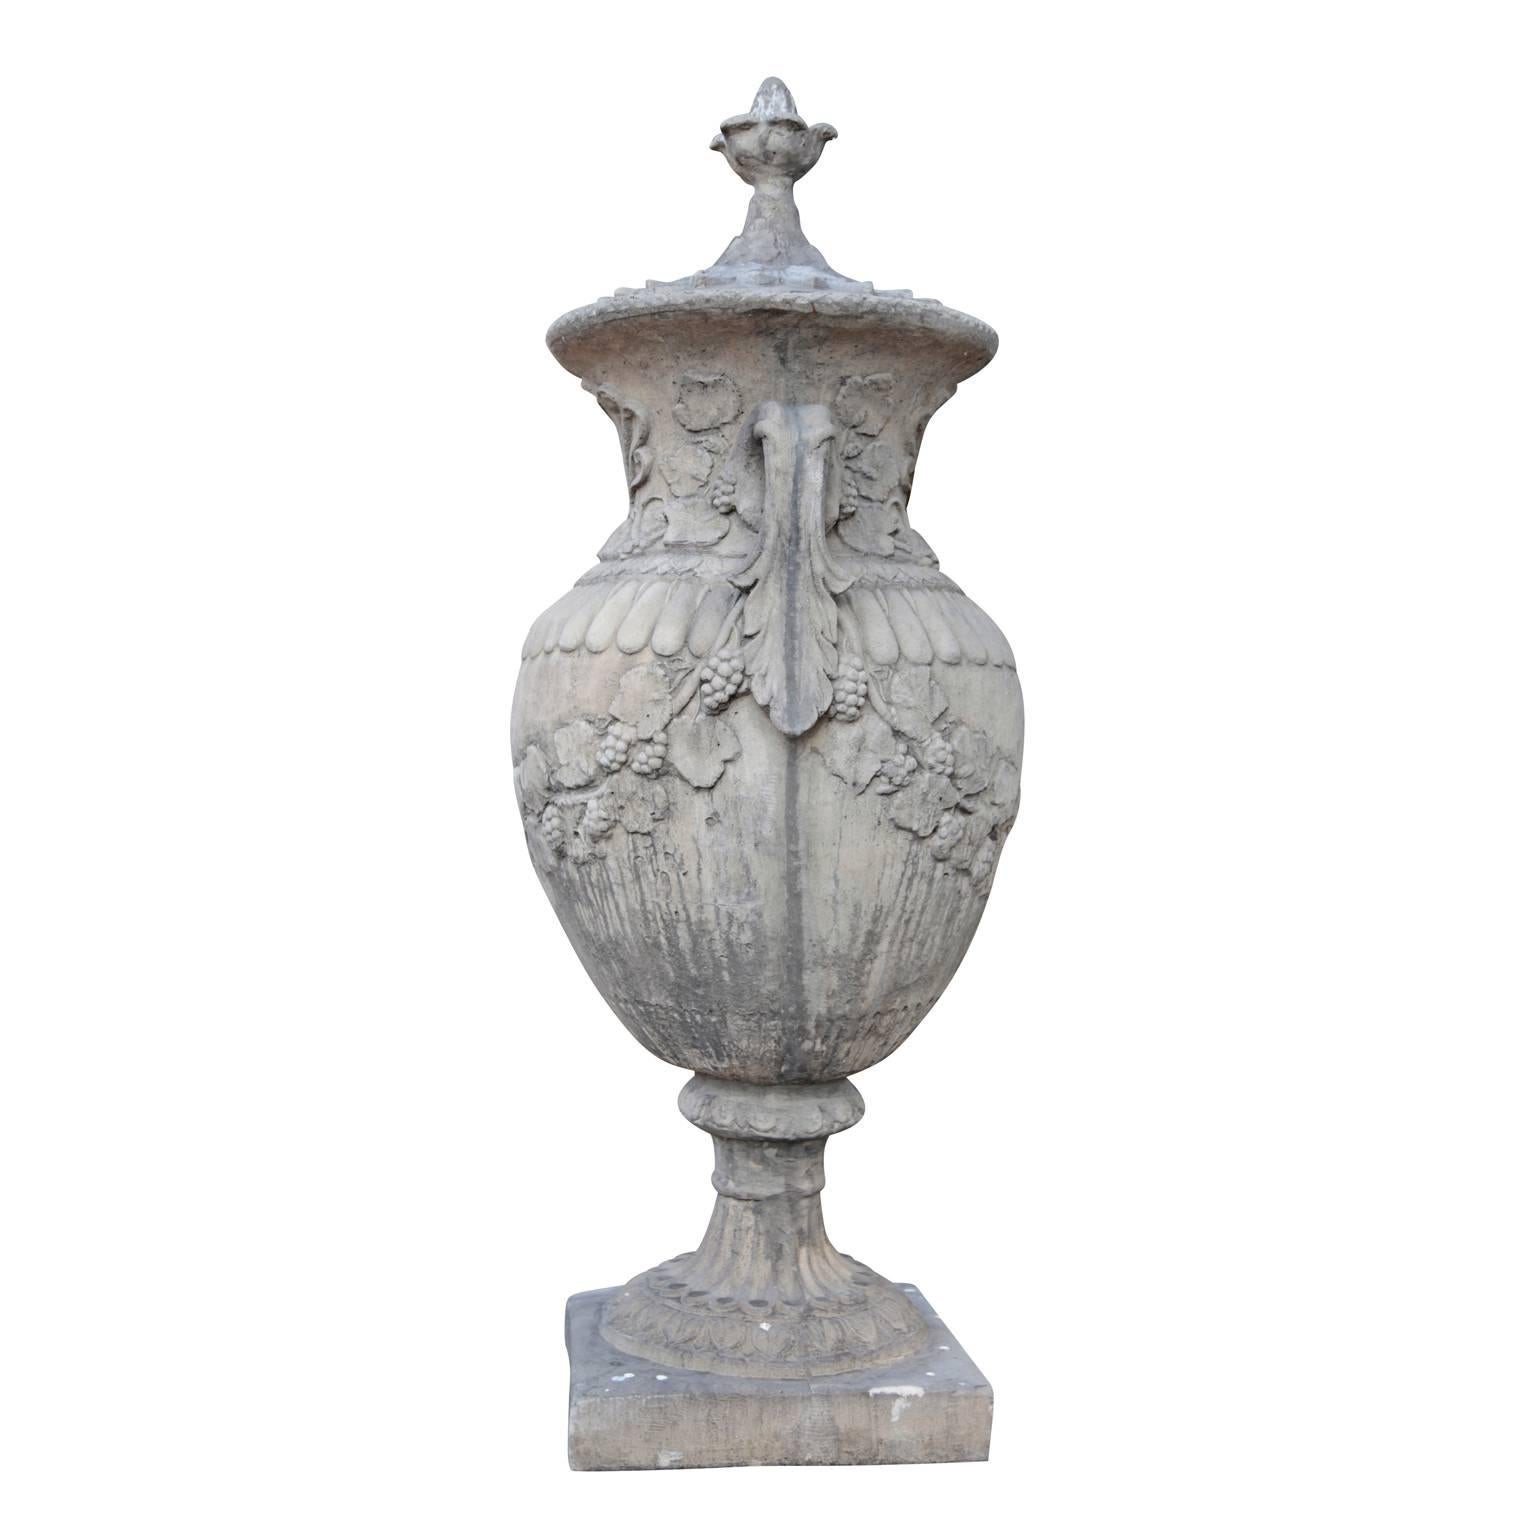 European Pair of Monumental Garden Urns in Neoclassical Style, Cast Standstone